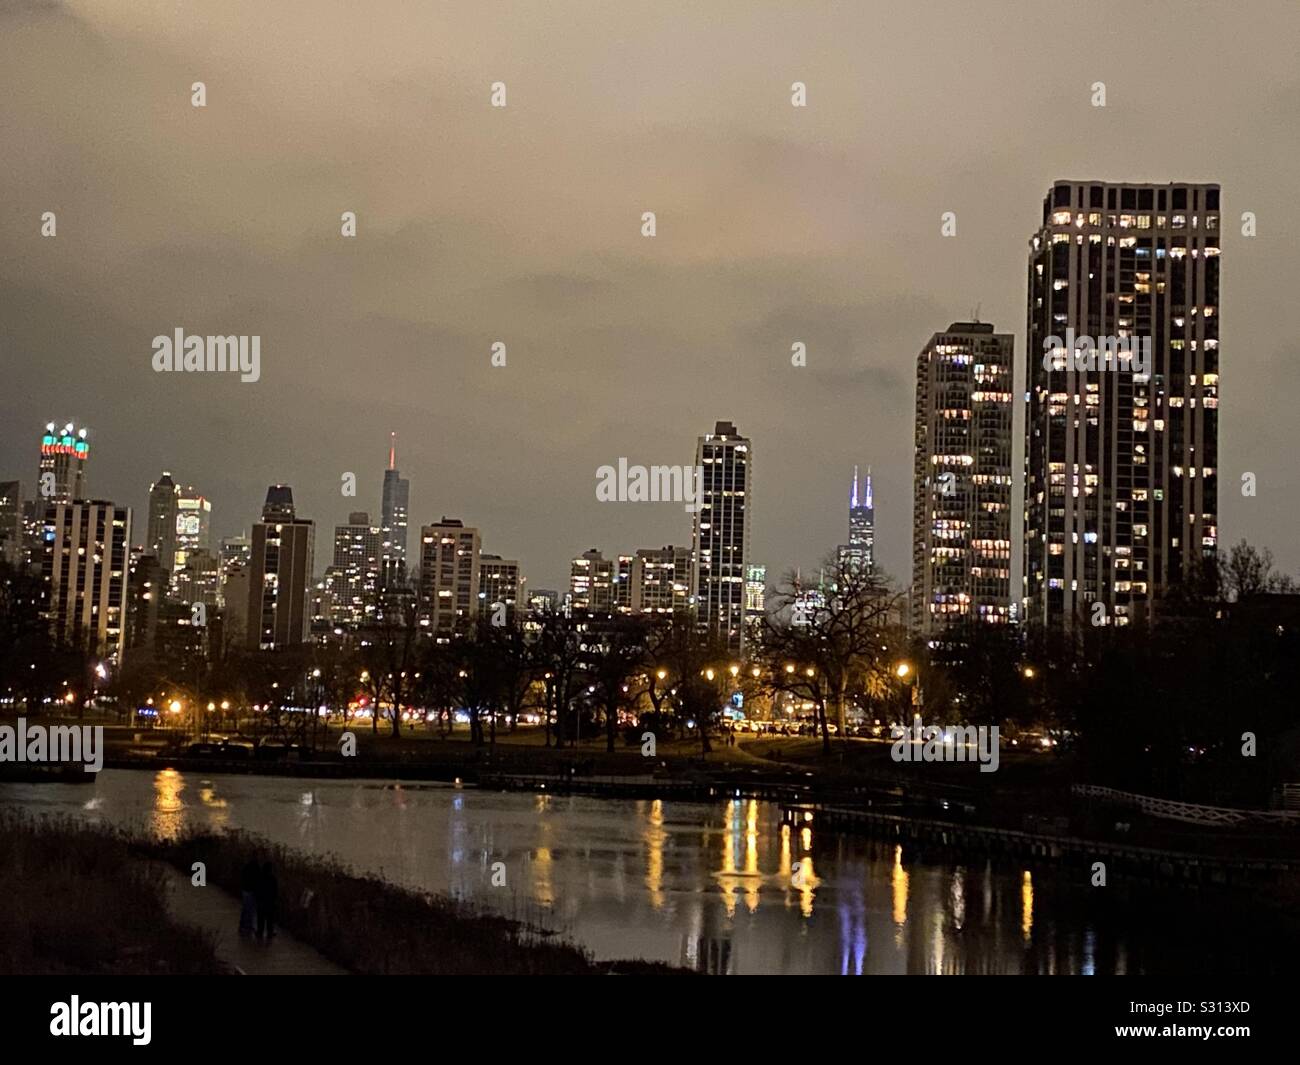 Chicago Skyline at Night facing south from Lincoln Park Zoo. Stock Photo